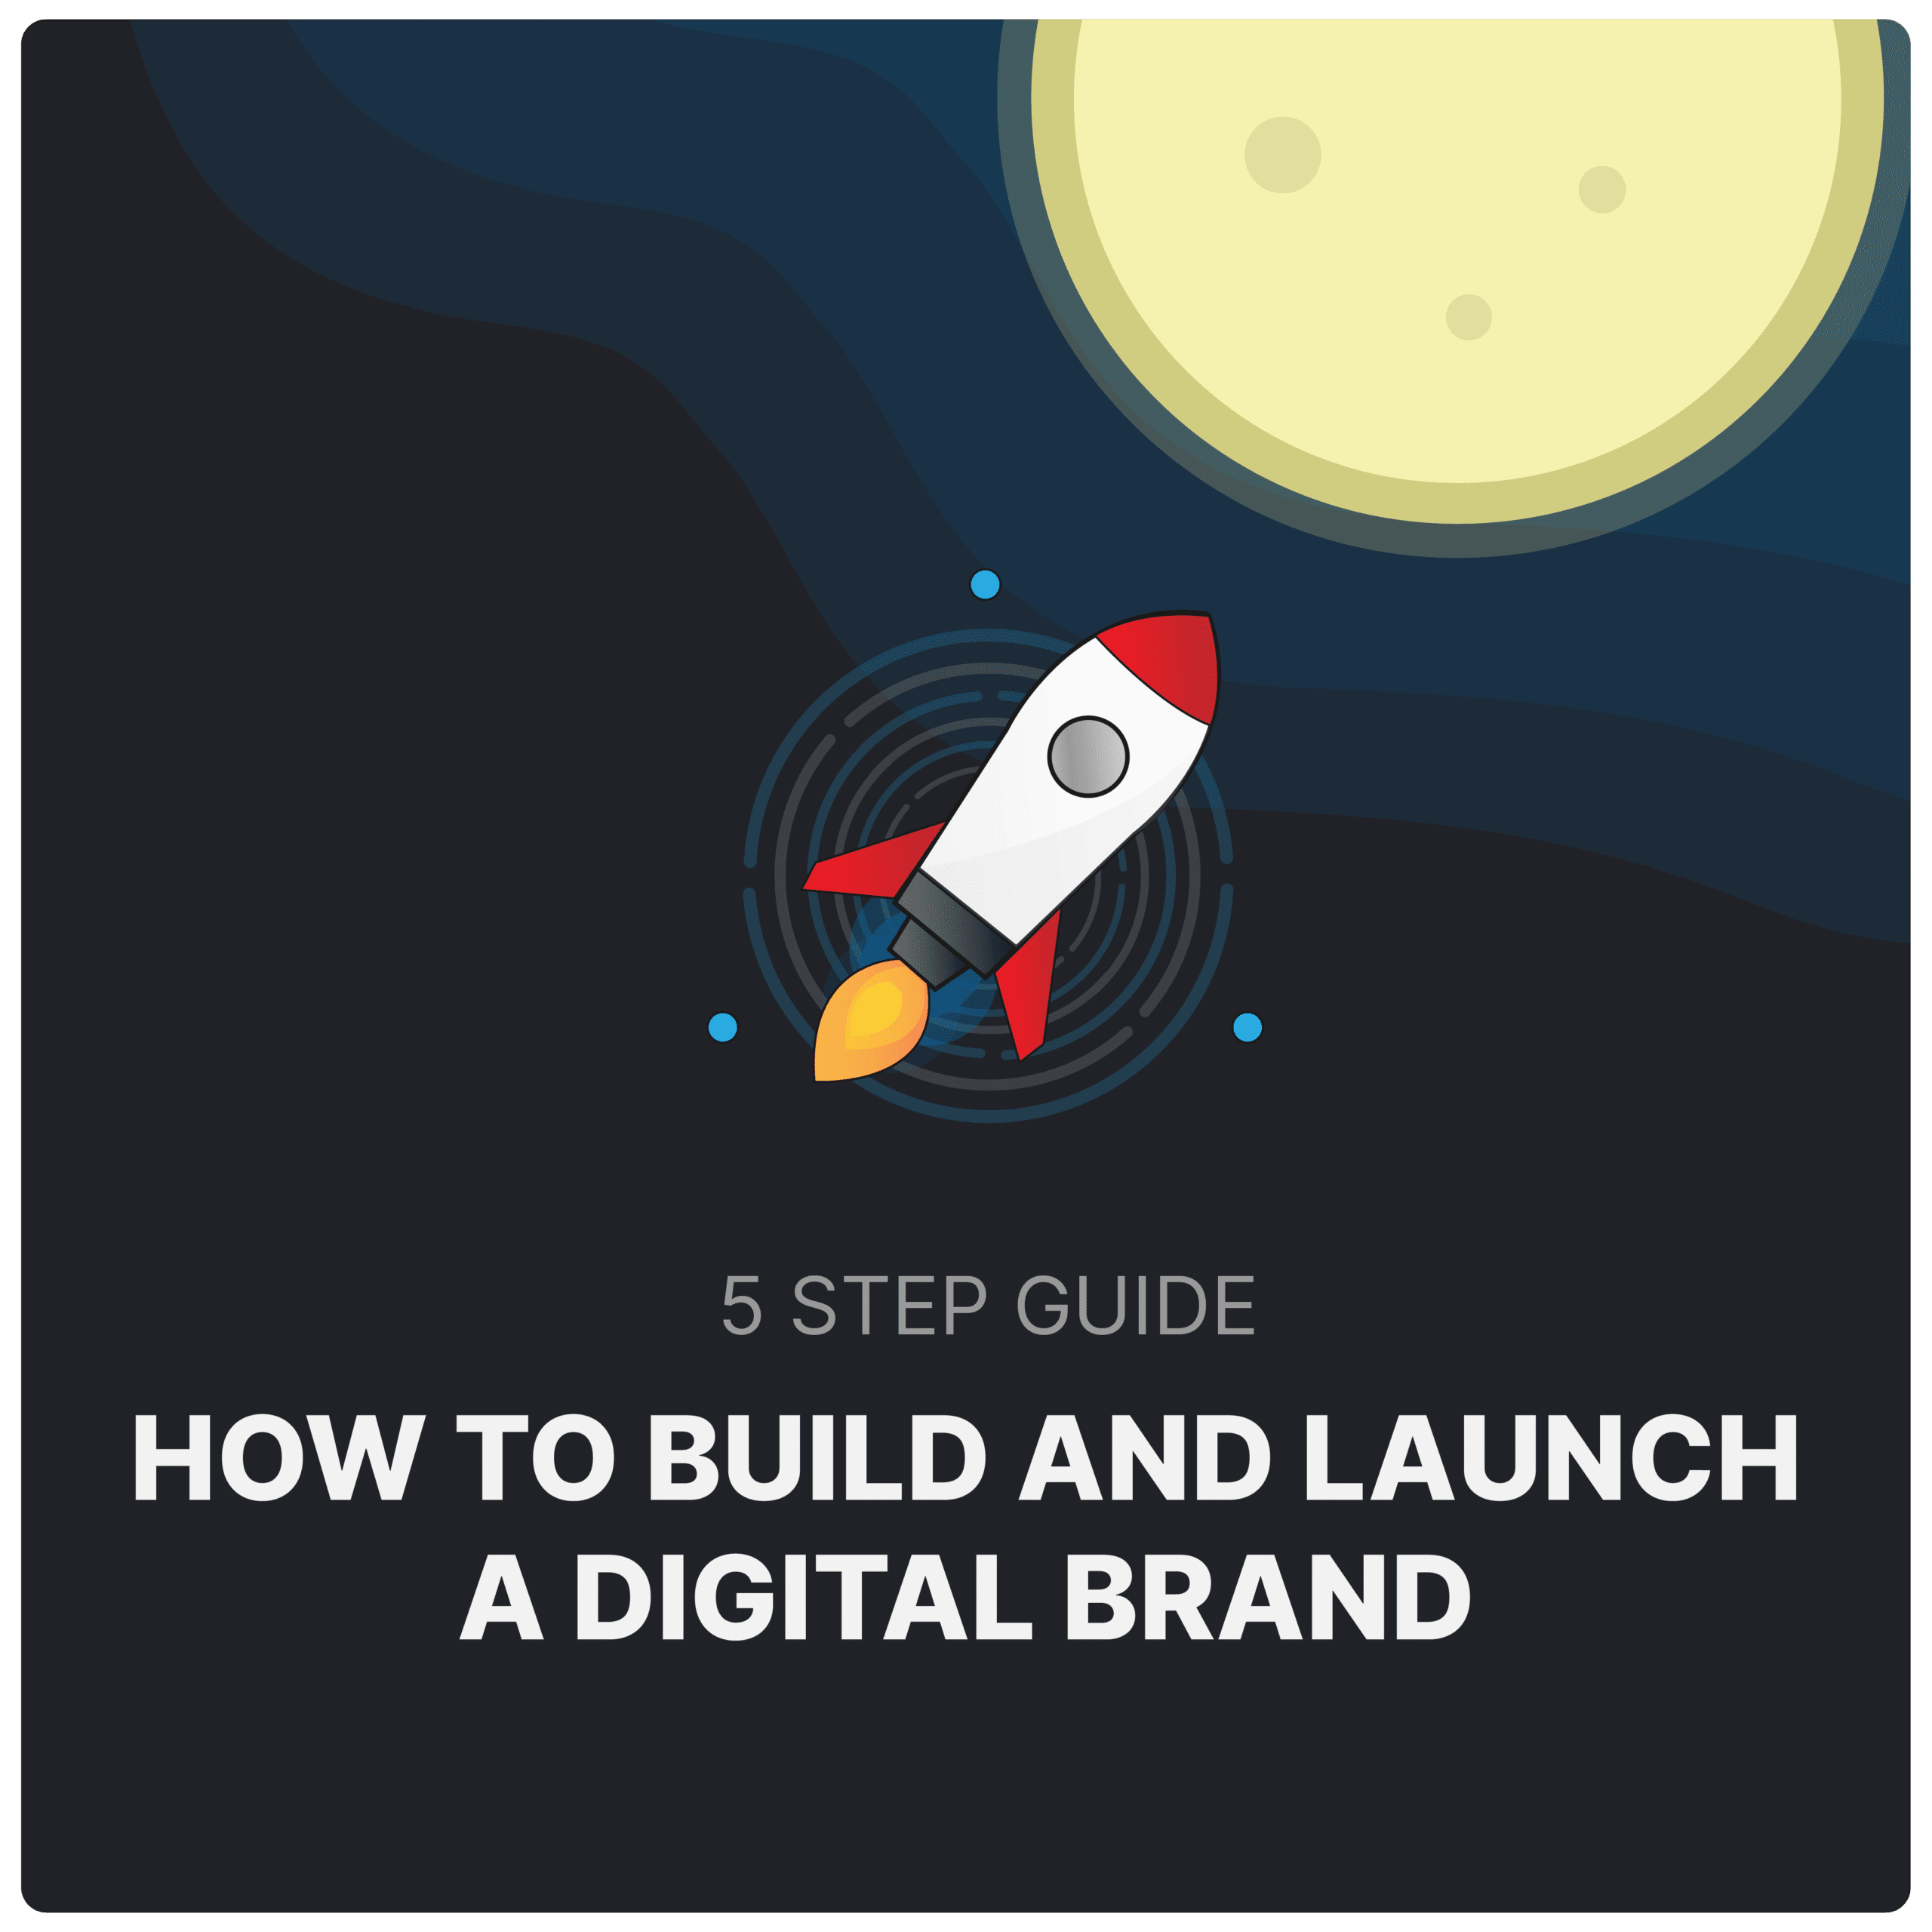 Start building your brand with the simple 5 step guide.